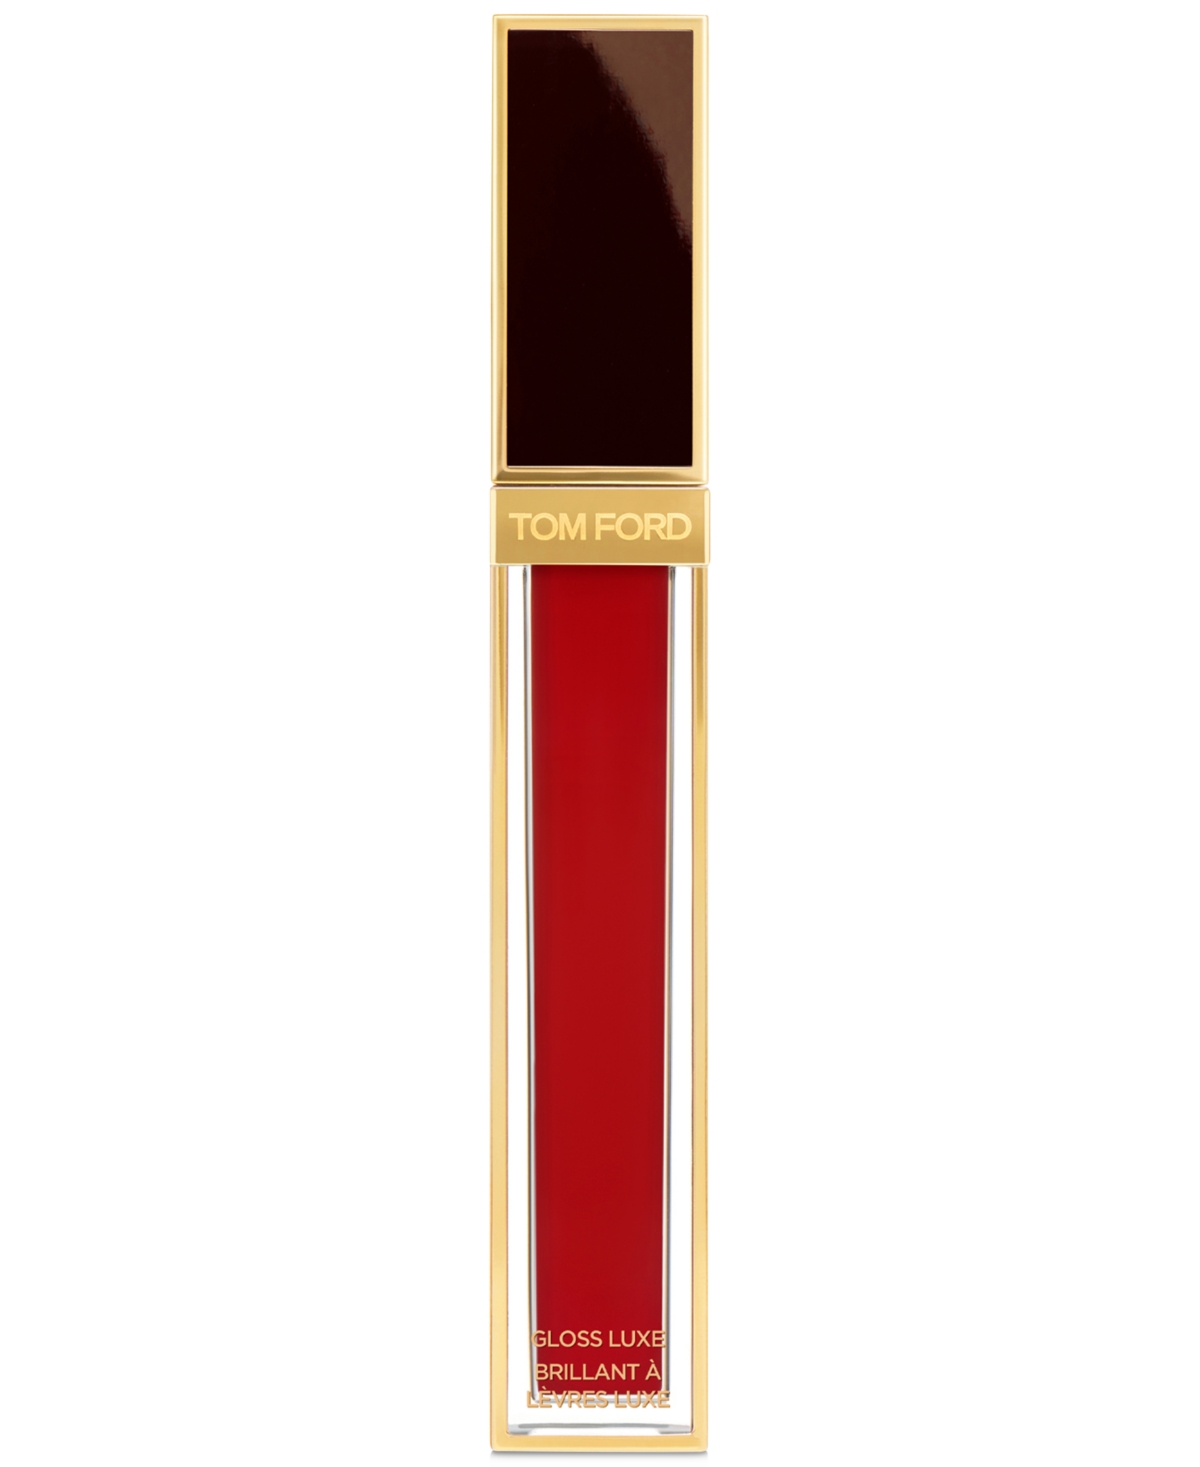 UPC 888066088848 product image for Tom Ford Gloss Luxe | upcitemdb.com